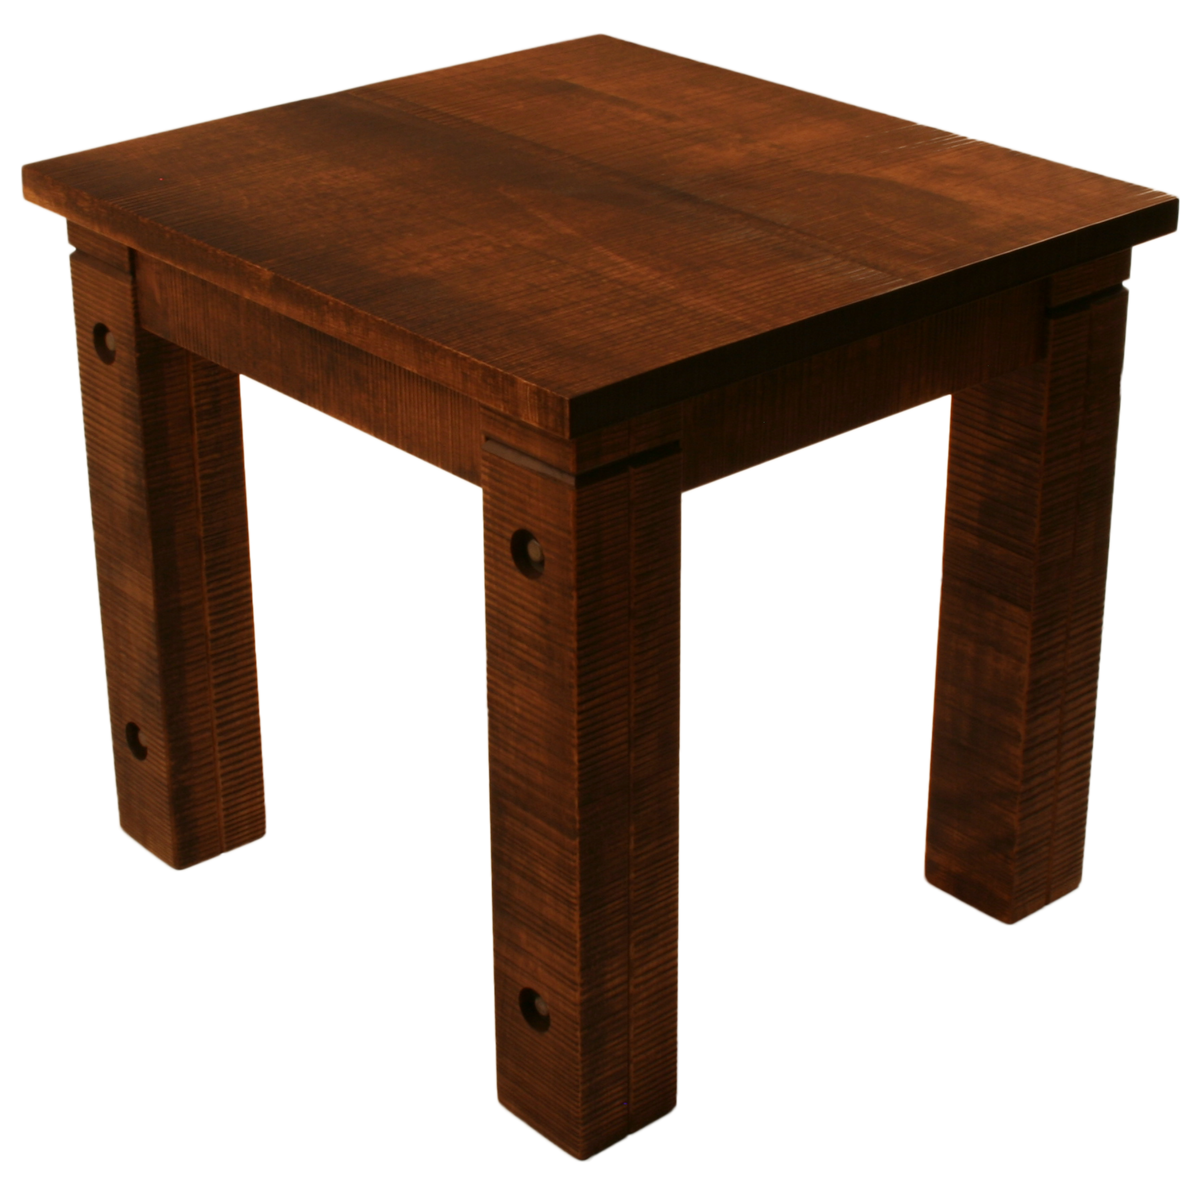 Table Wood Material - What Is The Best Material For Your Dining Table